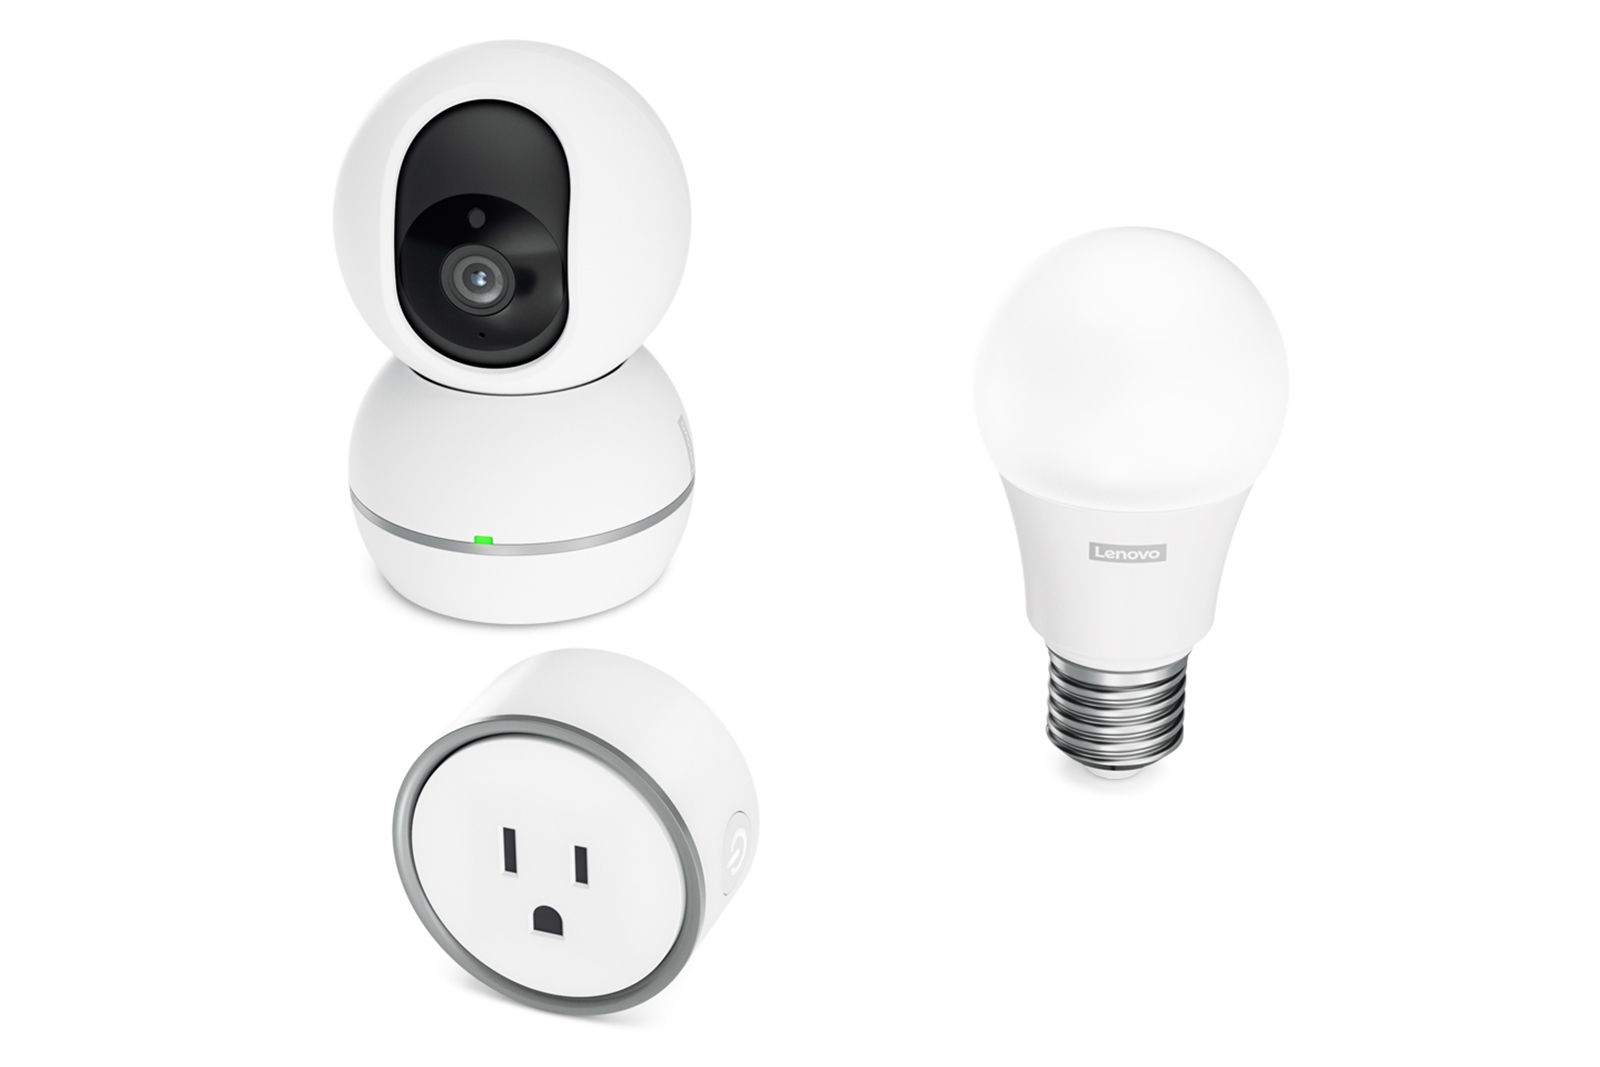 Lenovo looking to take on Philips Hue and Samsung SmartThings with smart gadget line-up image 1